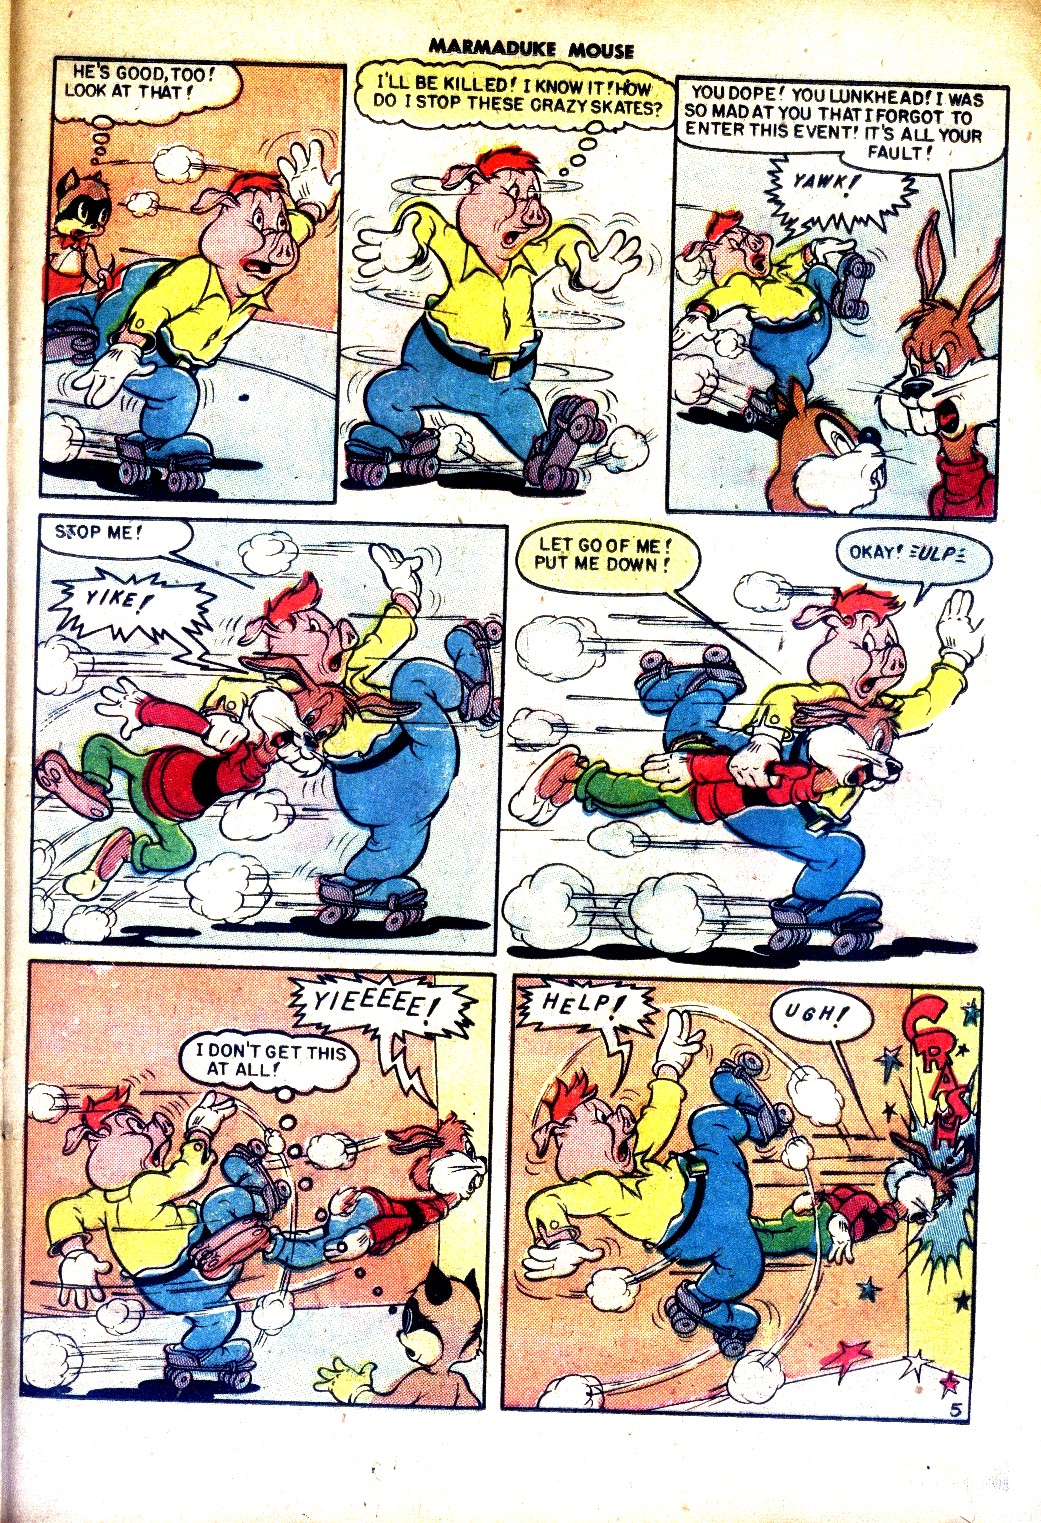 Read online Marmaduke Mouse comic -  Issue #17 - 25